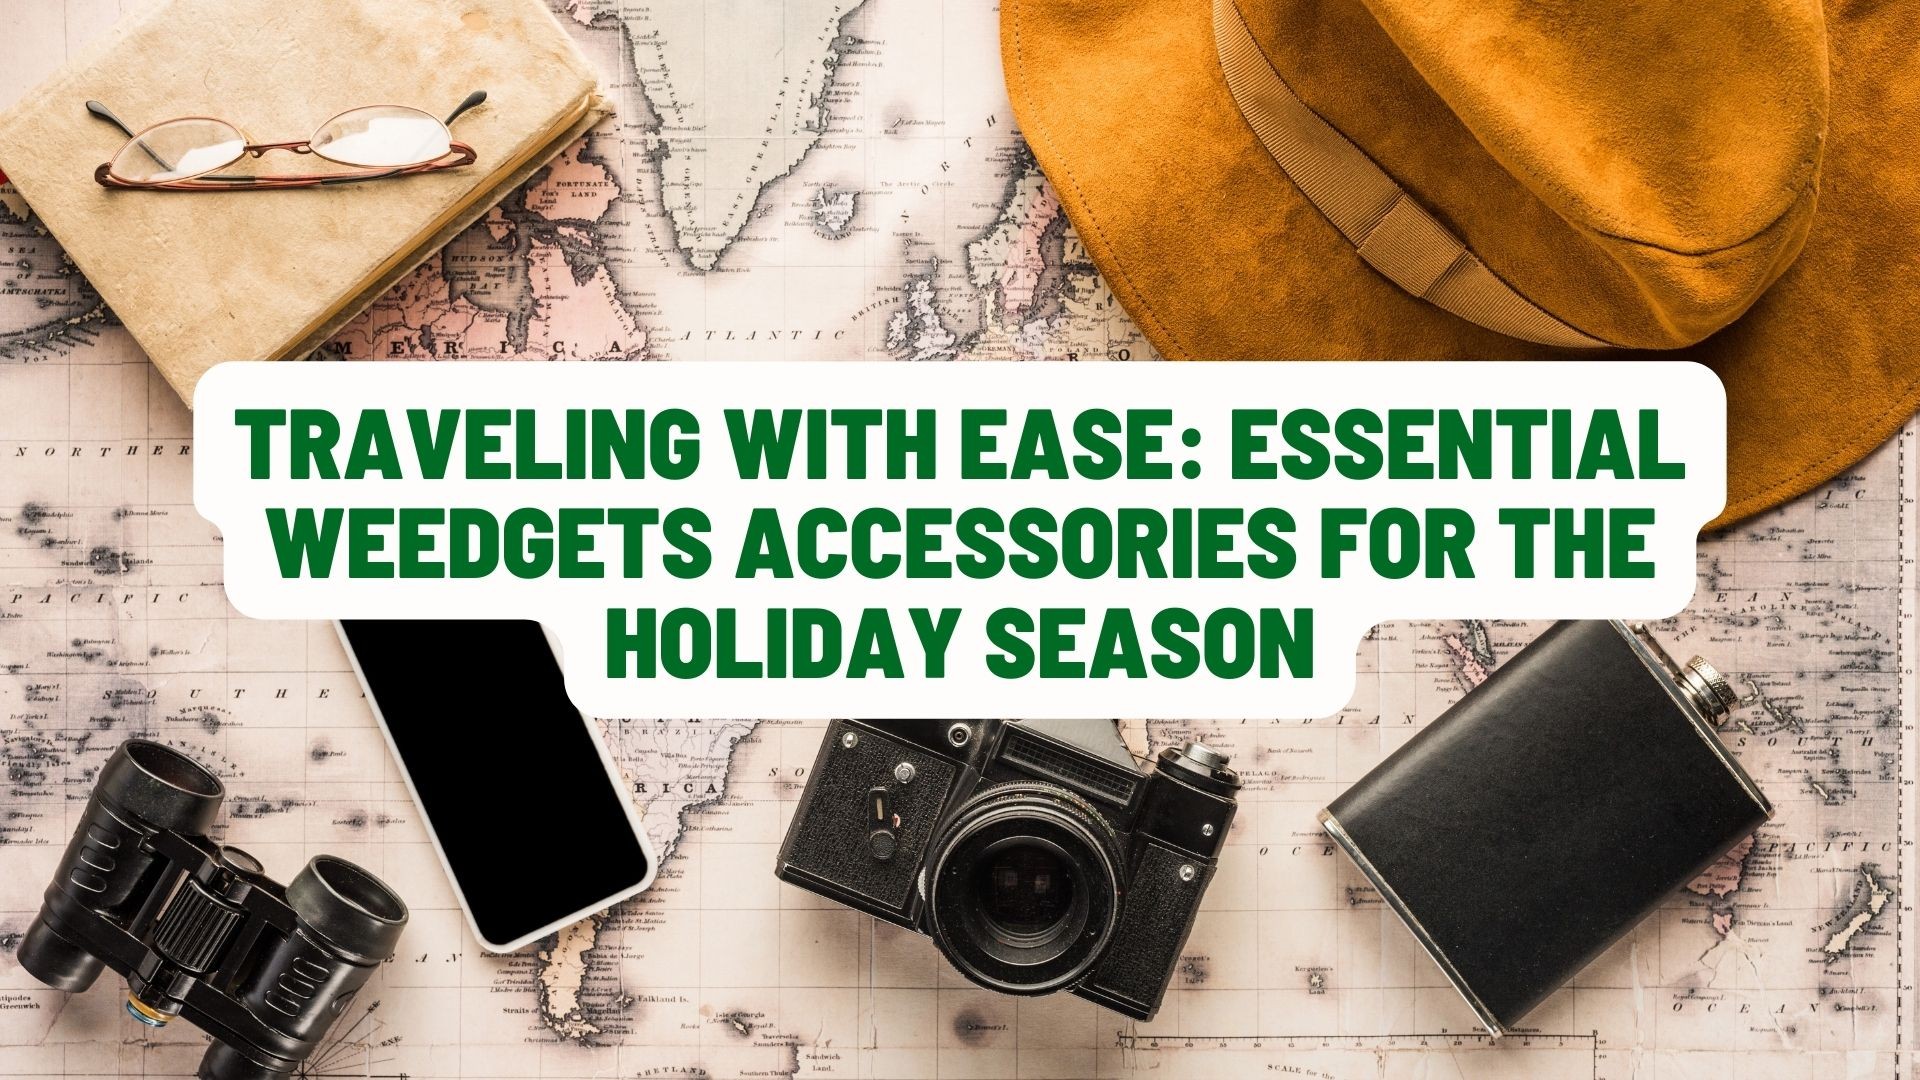 Traveling with Ease: Essential Weedgets Accessories for the Holiday Season